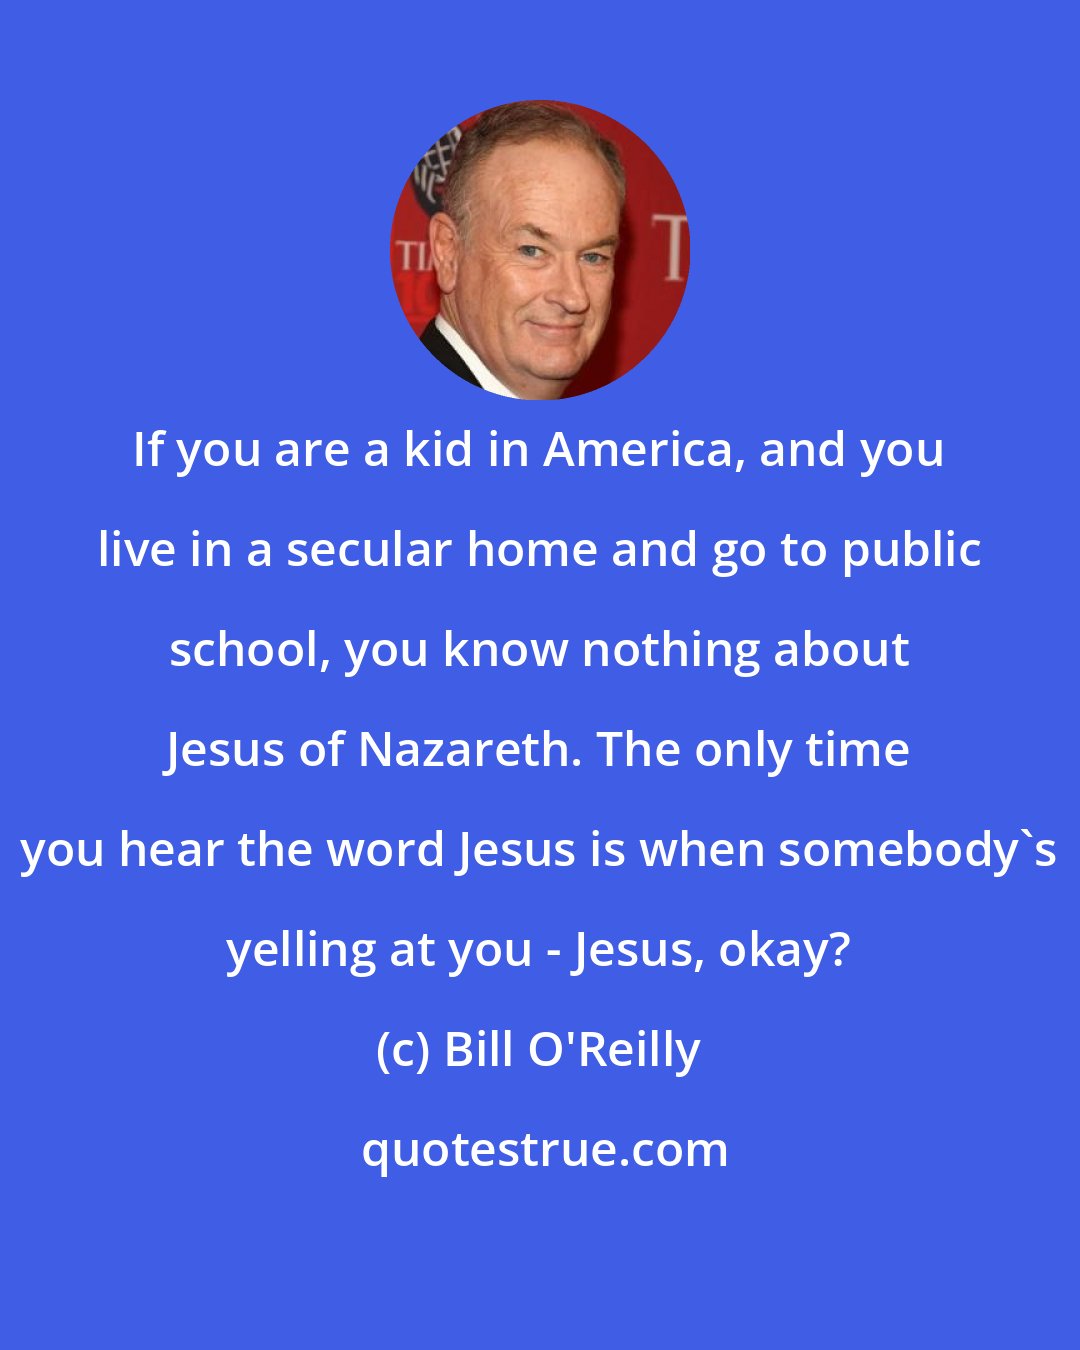 Bill O'Reilly: If you are a kid in America, and you live in a secular home and go to public school, you know nothing about Jesus of Nazareth. The only time you hear the word Jesus is when somebody's yelling at you - Jesus, okay?